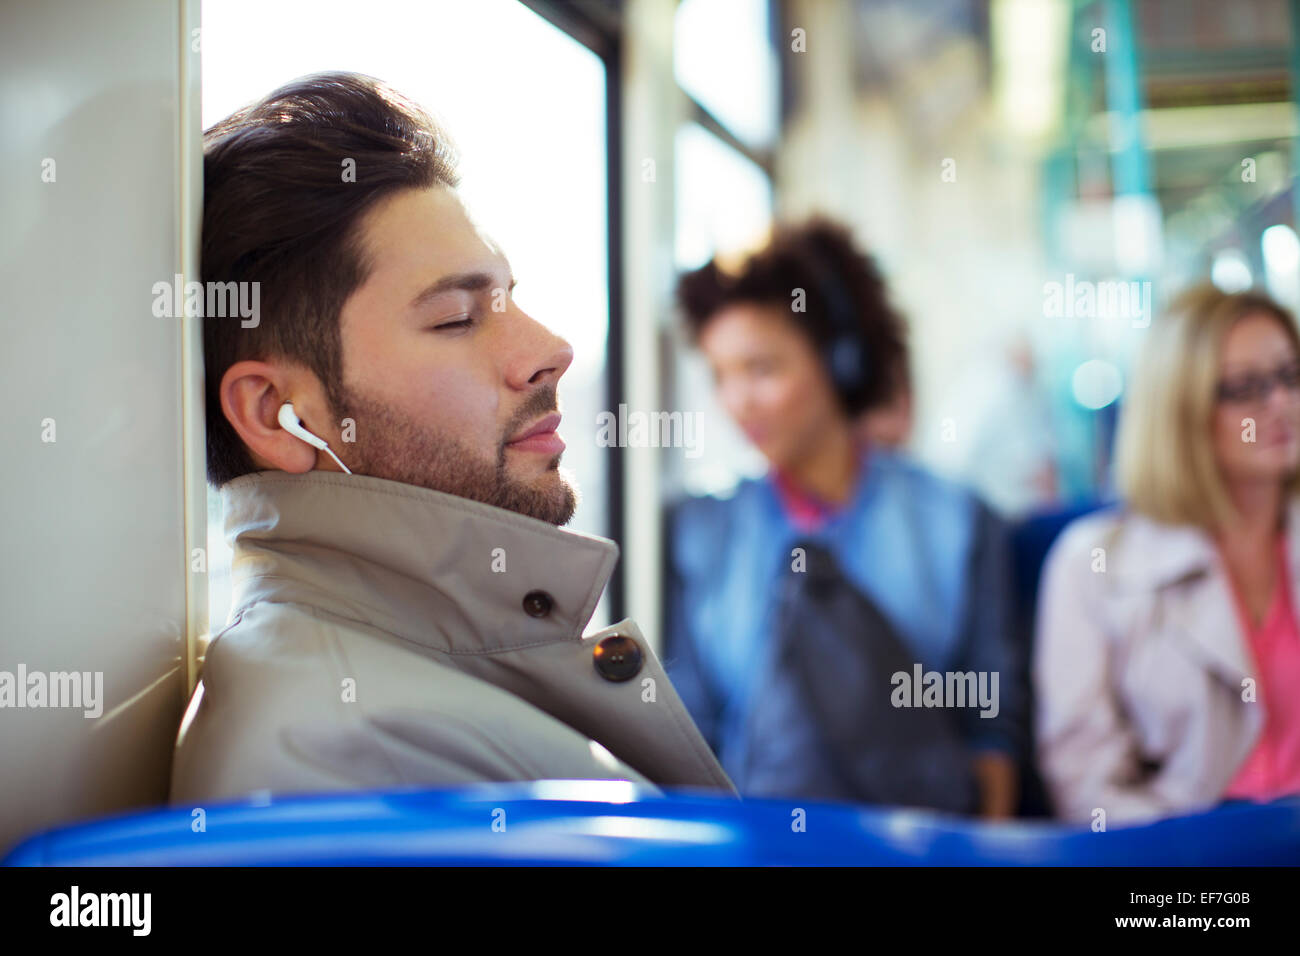 Businessman napping and listening to earbuds on train Stock Photo